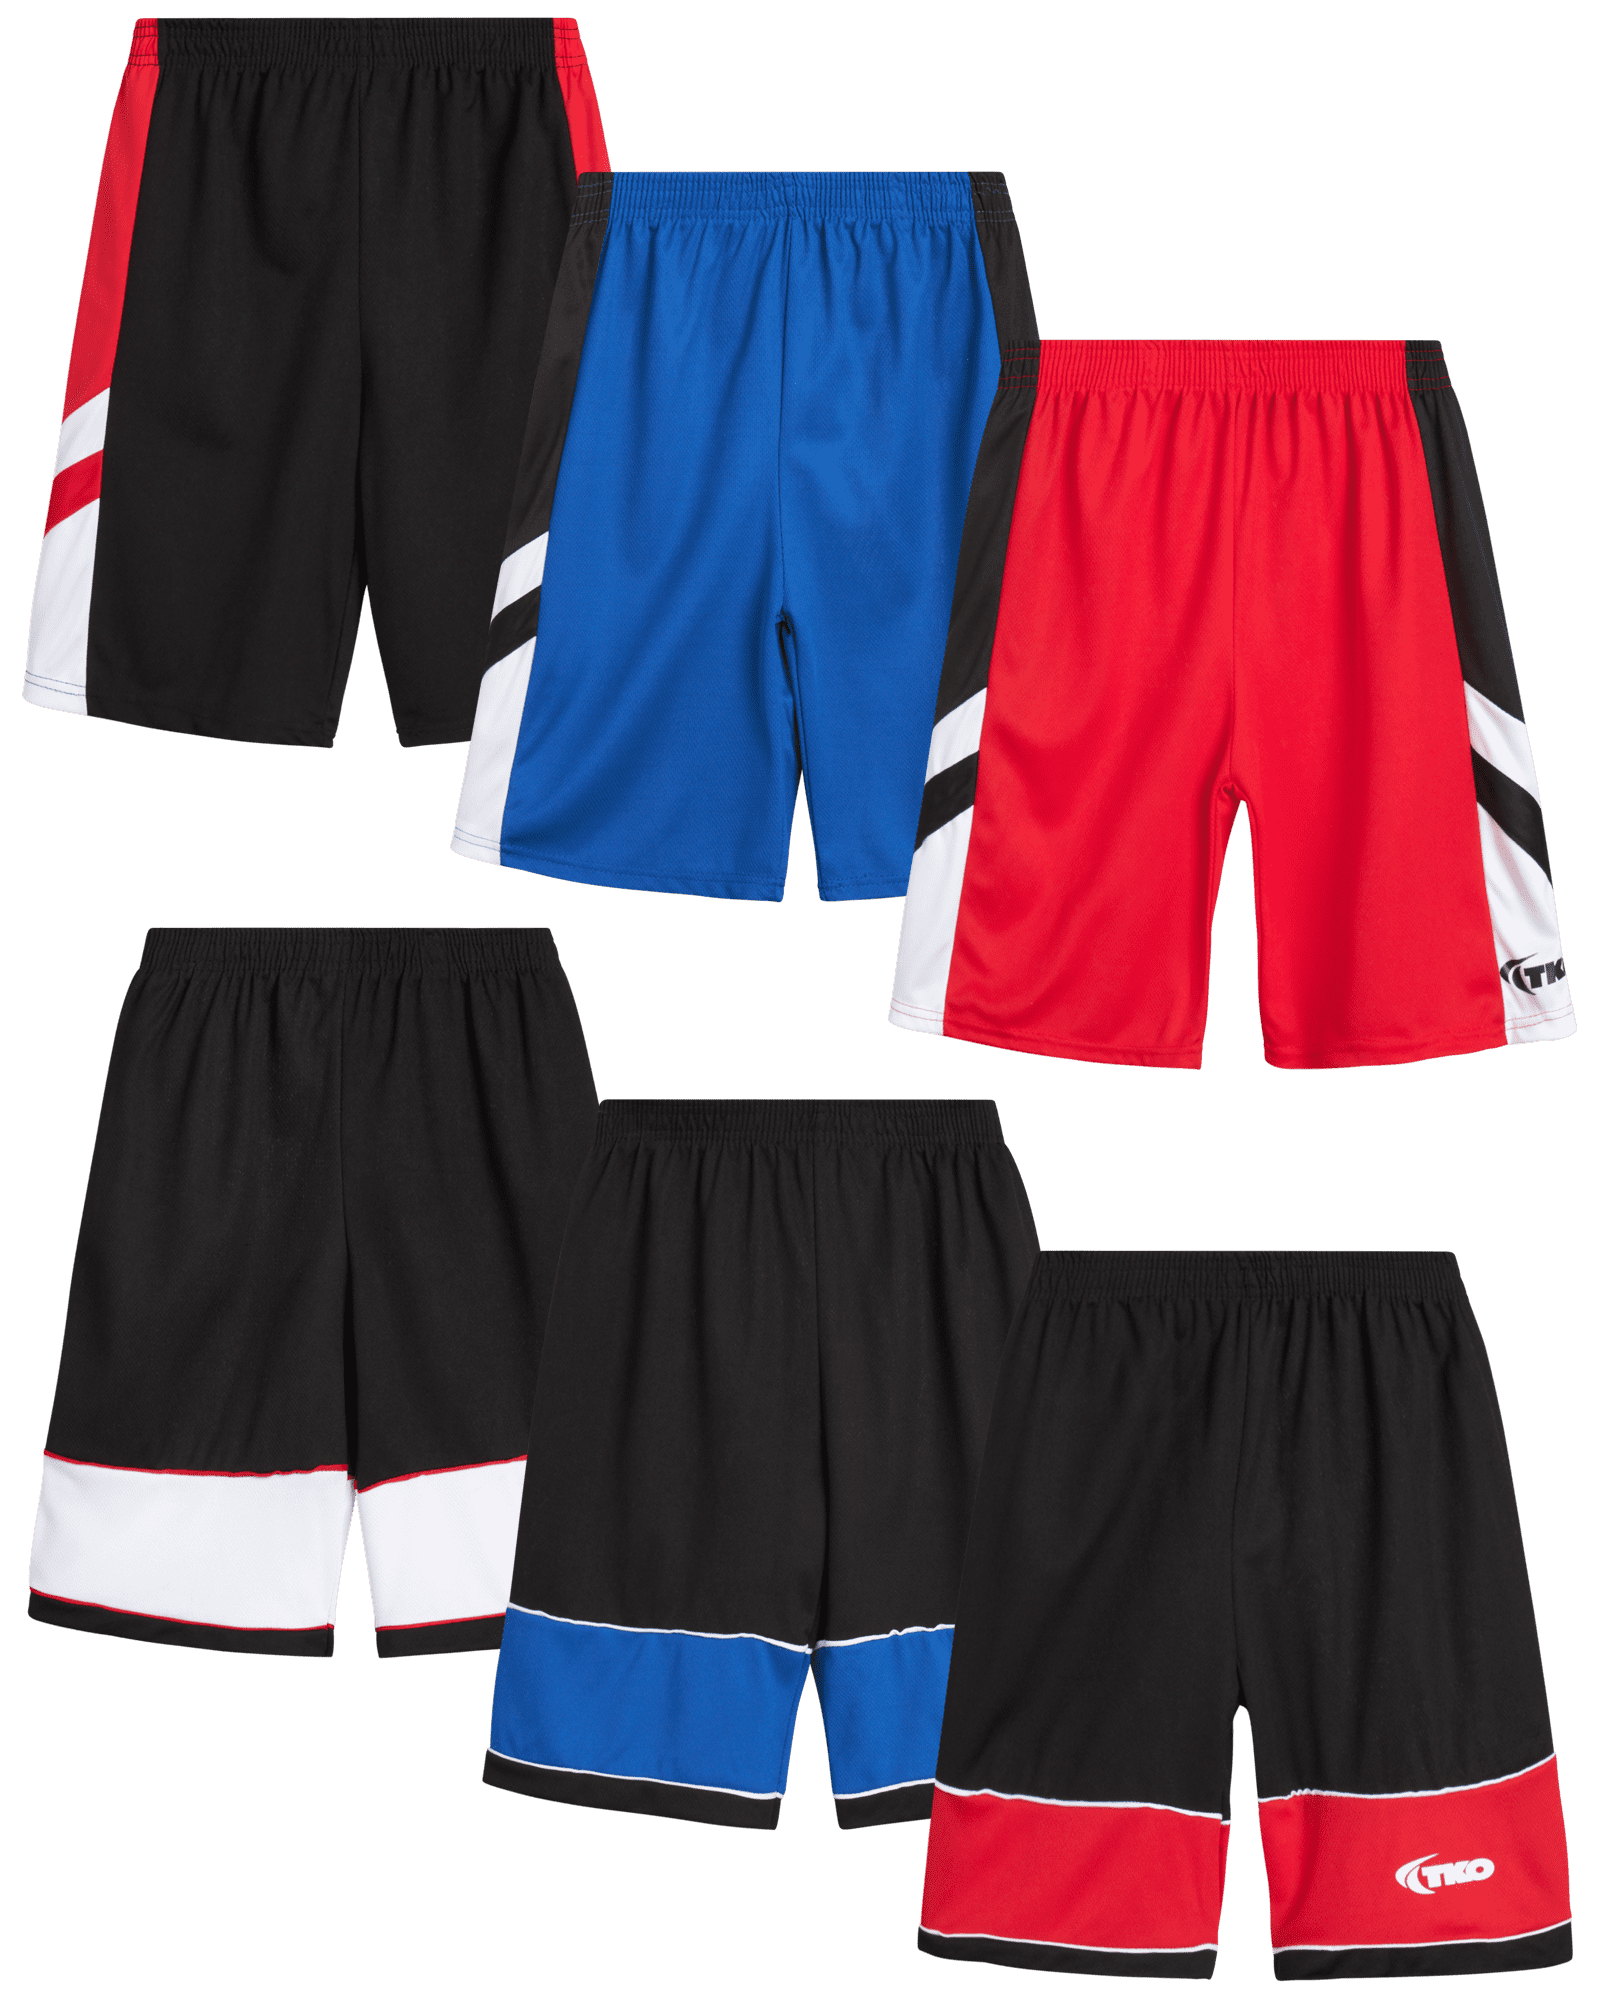 Boys' 6-Pack Mesh Active Athletic Performance Dry Fit Basketball Shorts (8-16) Walmart.com